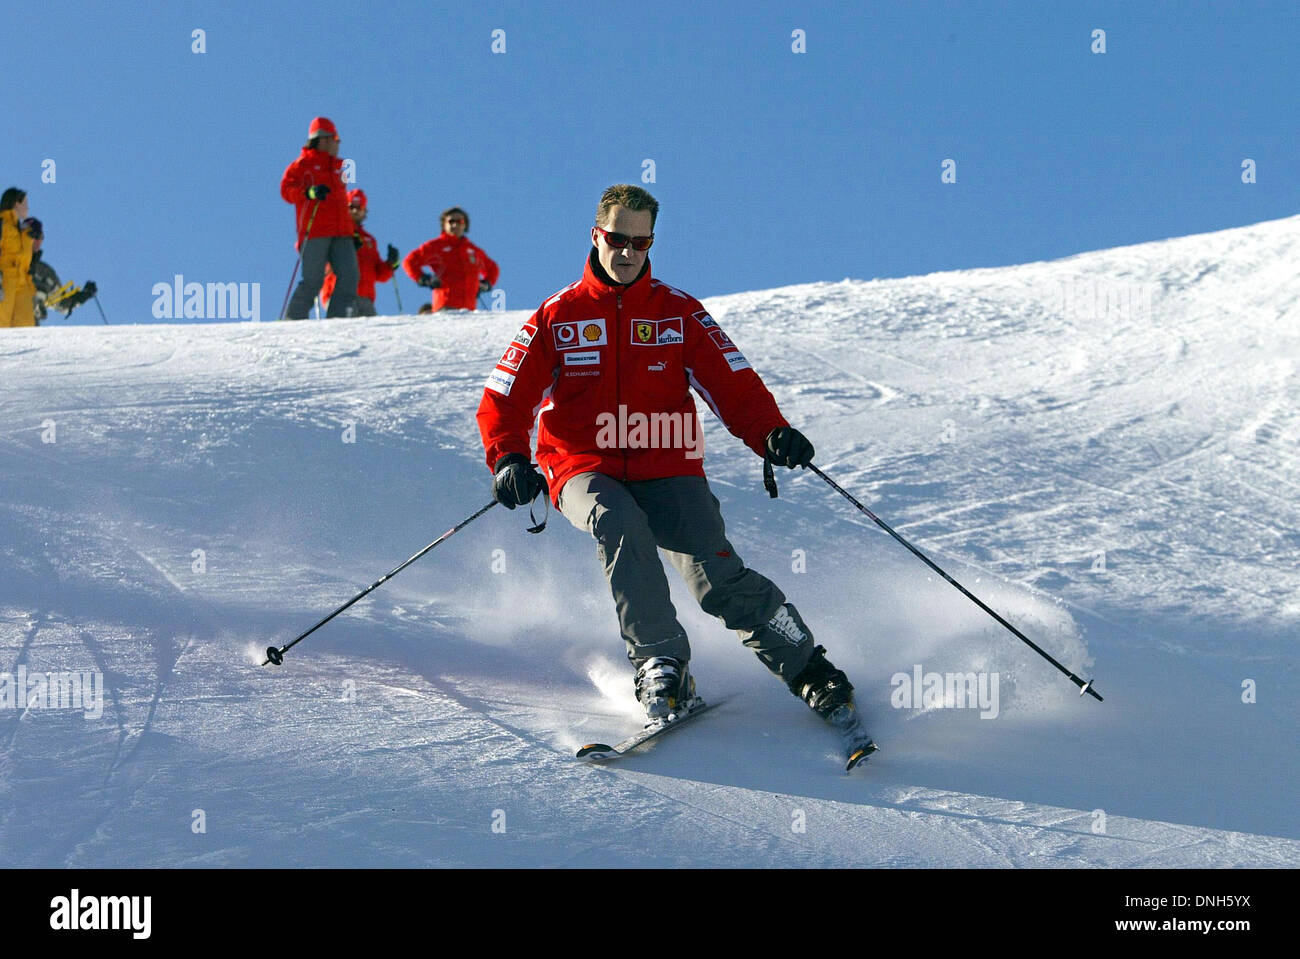 FILE: Madonna di Campiglio, Italy. 11th Jan, 2005. (dpa) - Seven time Formula 1 champion Michael Schumacher (team Ferrari) skis down the slopes shortly after arriving in the ski resort of Madonna di Campiglio, Italy, 11 January 2005. The Ferrari team got together for its traditional ski vacation in the Italian Alps. (ITALY OUT) Credit: dpa/Alamy Live News Stock Photo